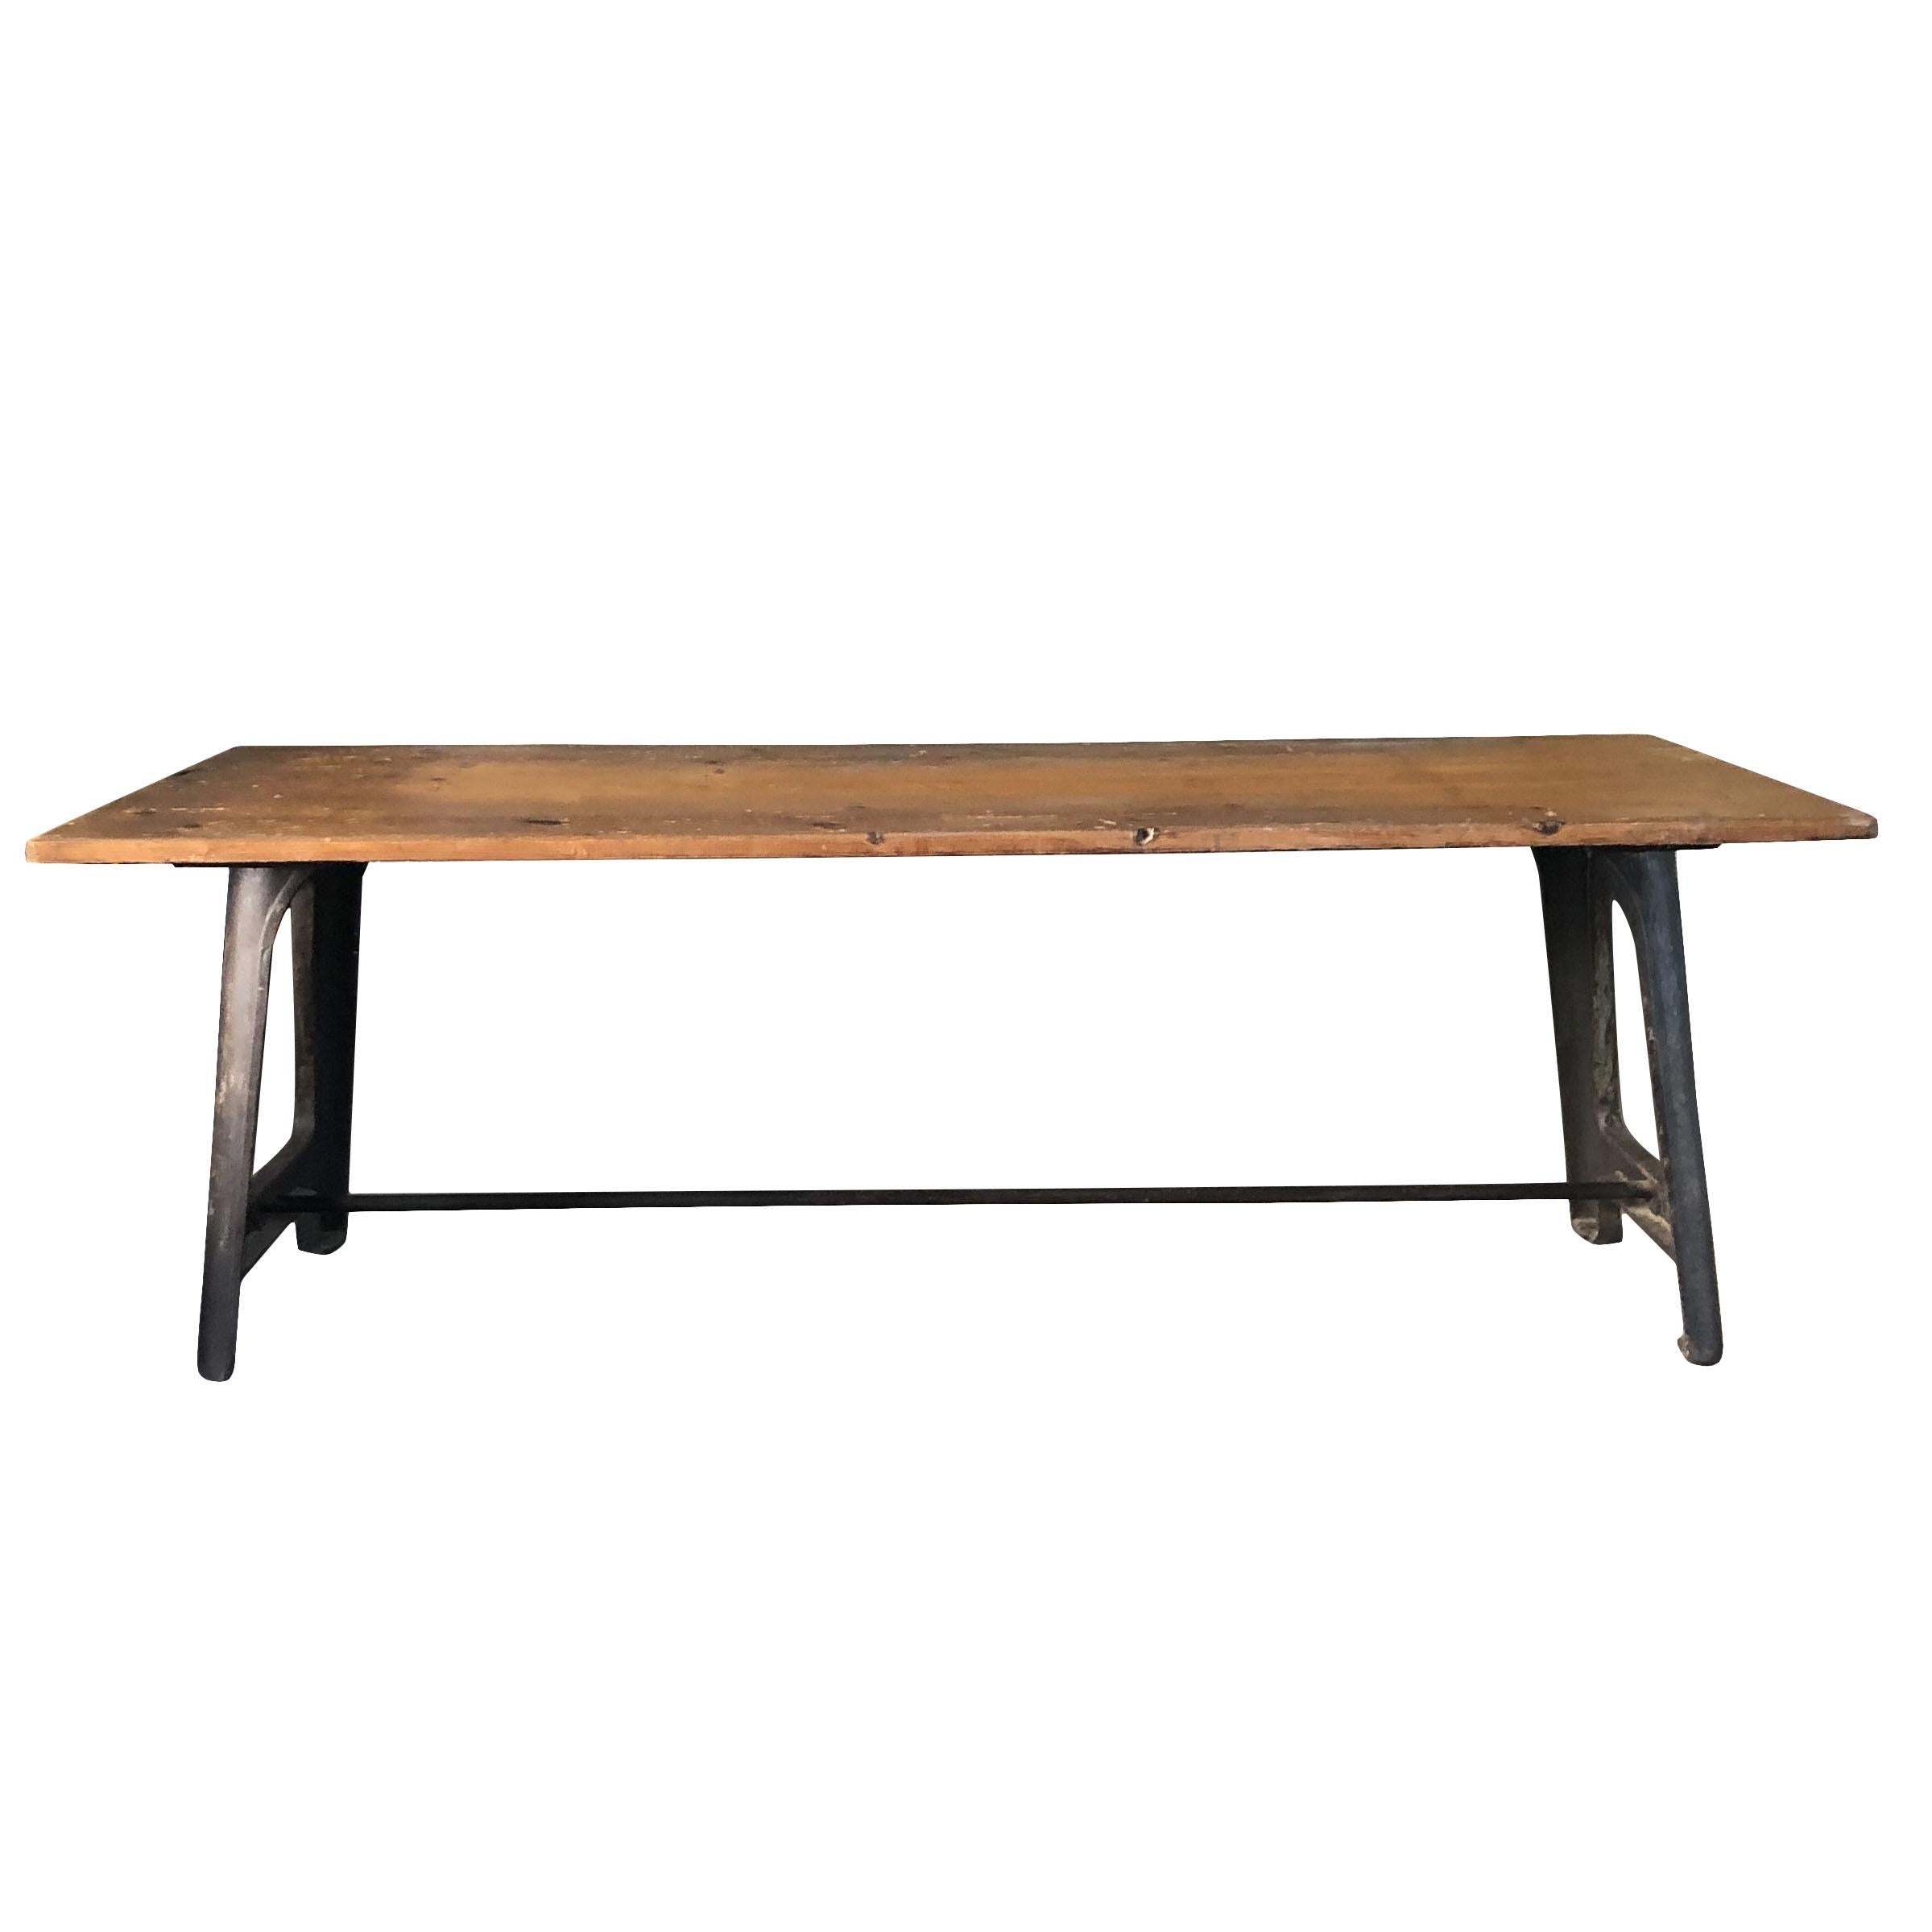 An antique rustic French industrial table made of a pinewood table top and a cast iron base with metal tresses lateral bolts. Wear consistent with age and use, circa 1910, France.